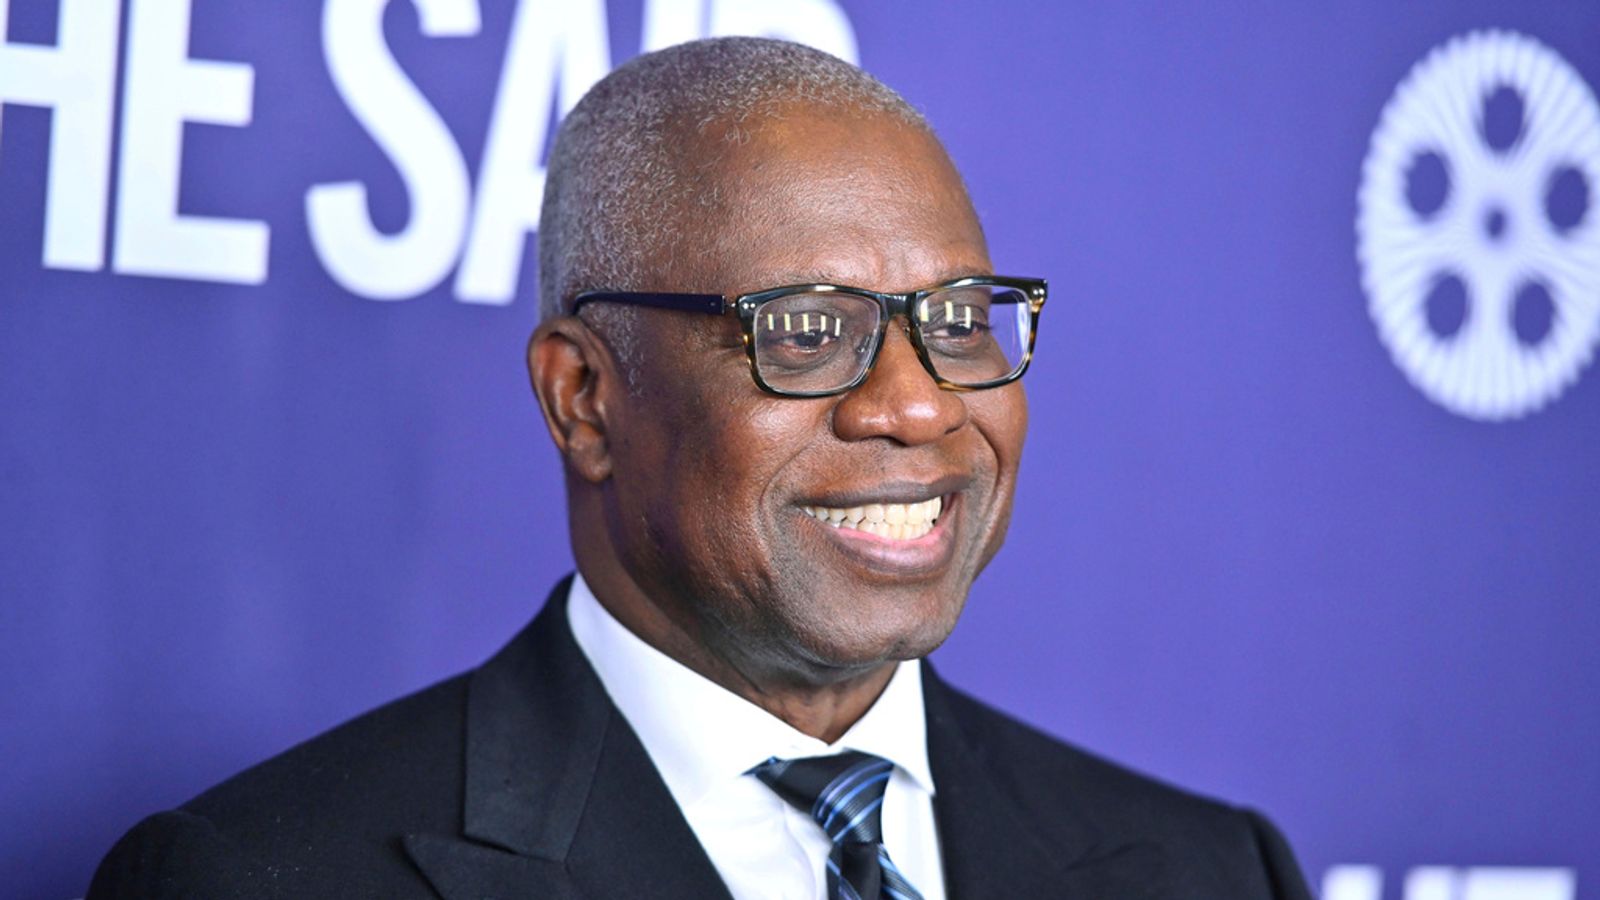 Andre Braugher: Brooklyn Nine-Nine actor died after 'brief illness', publicist says 